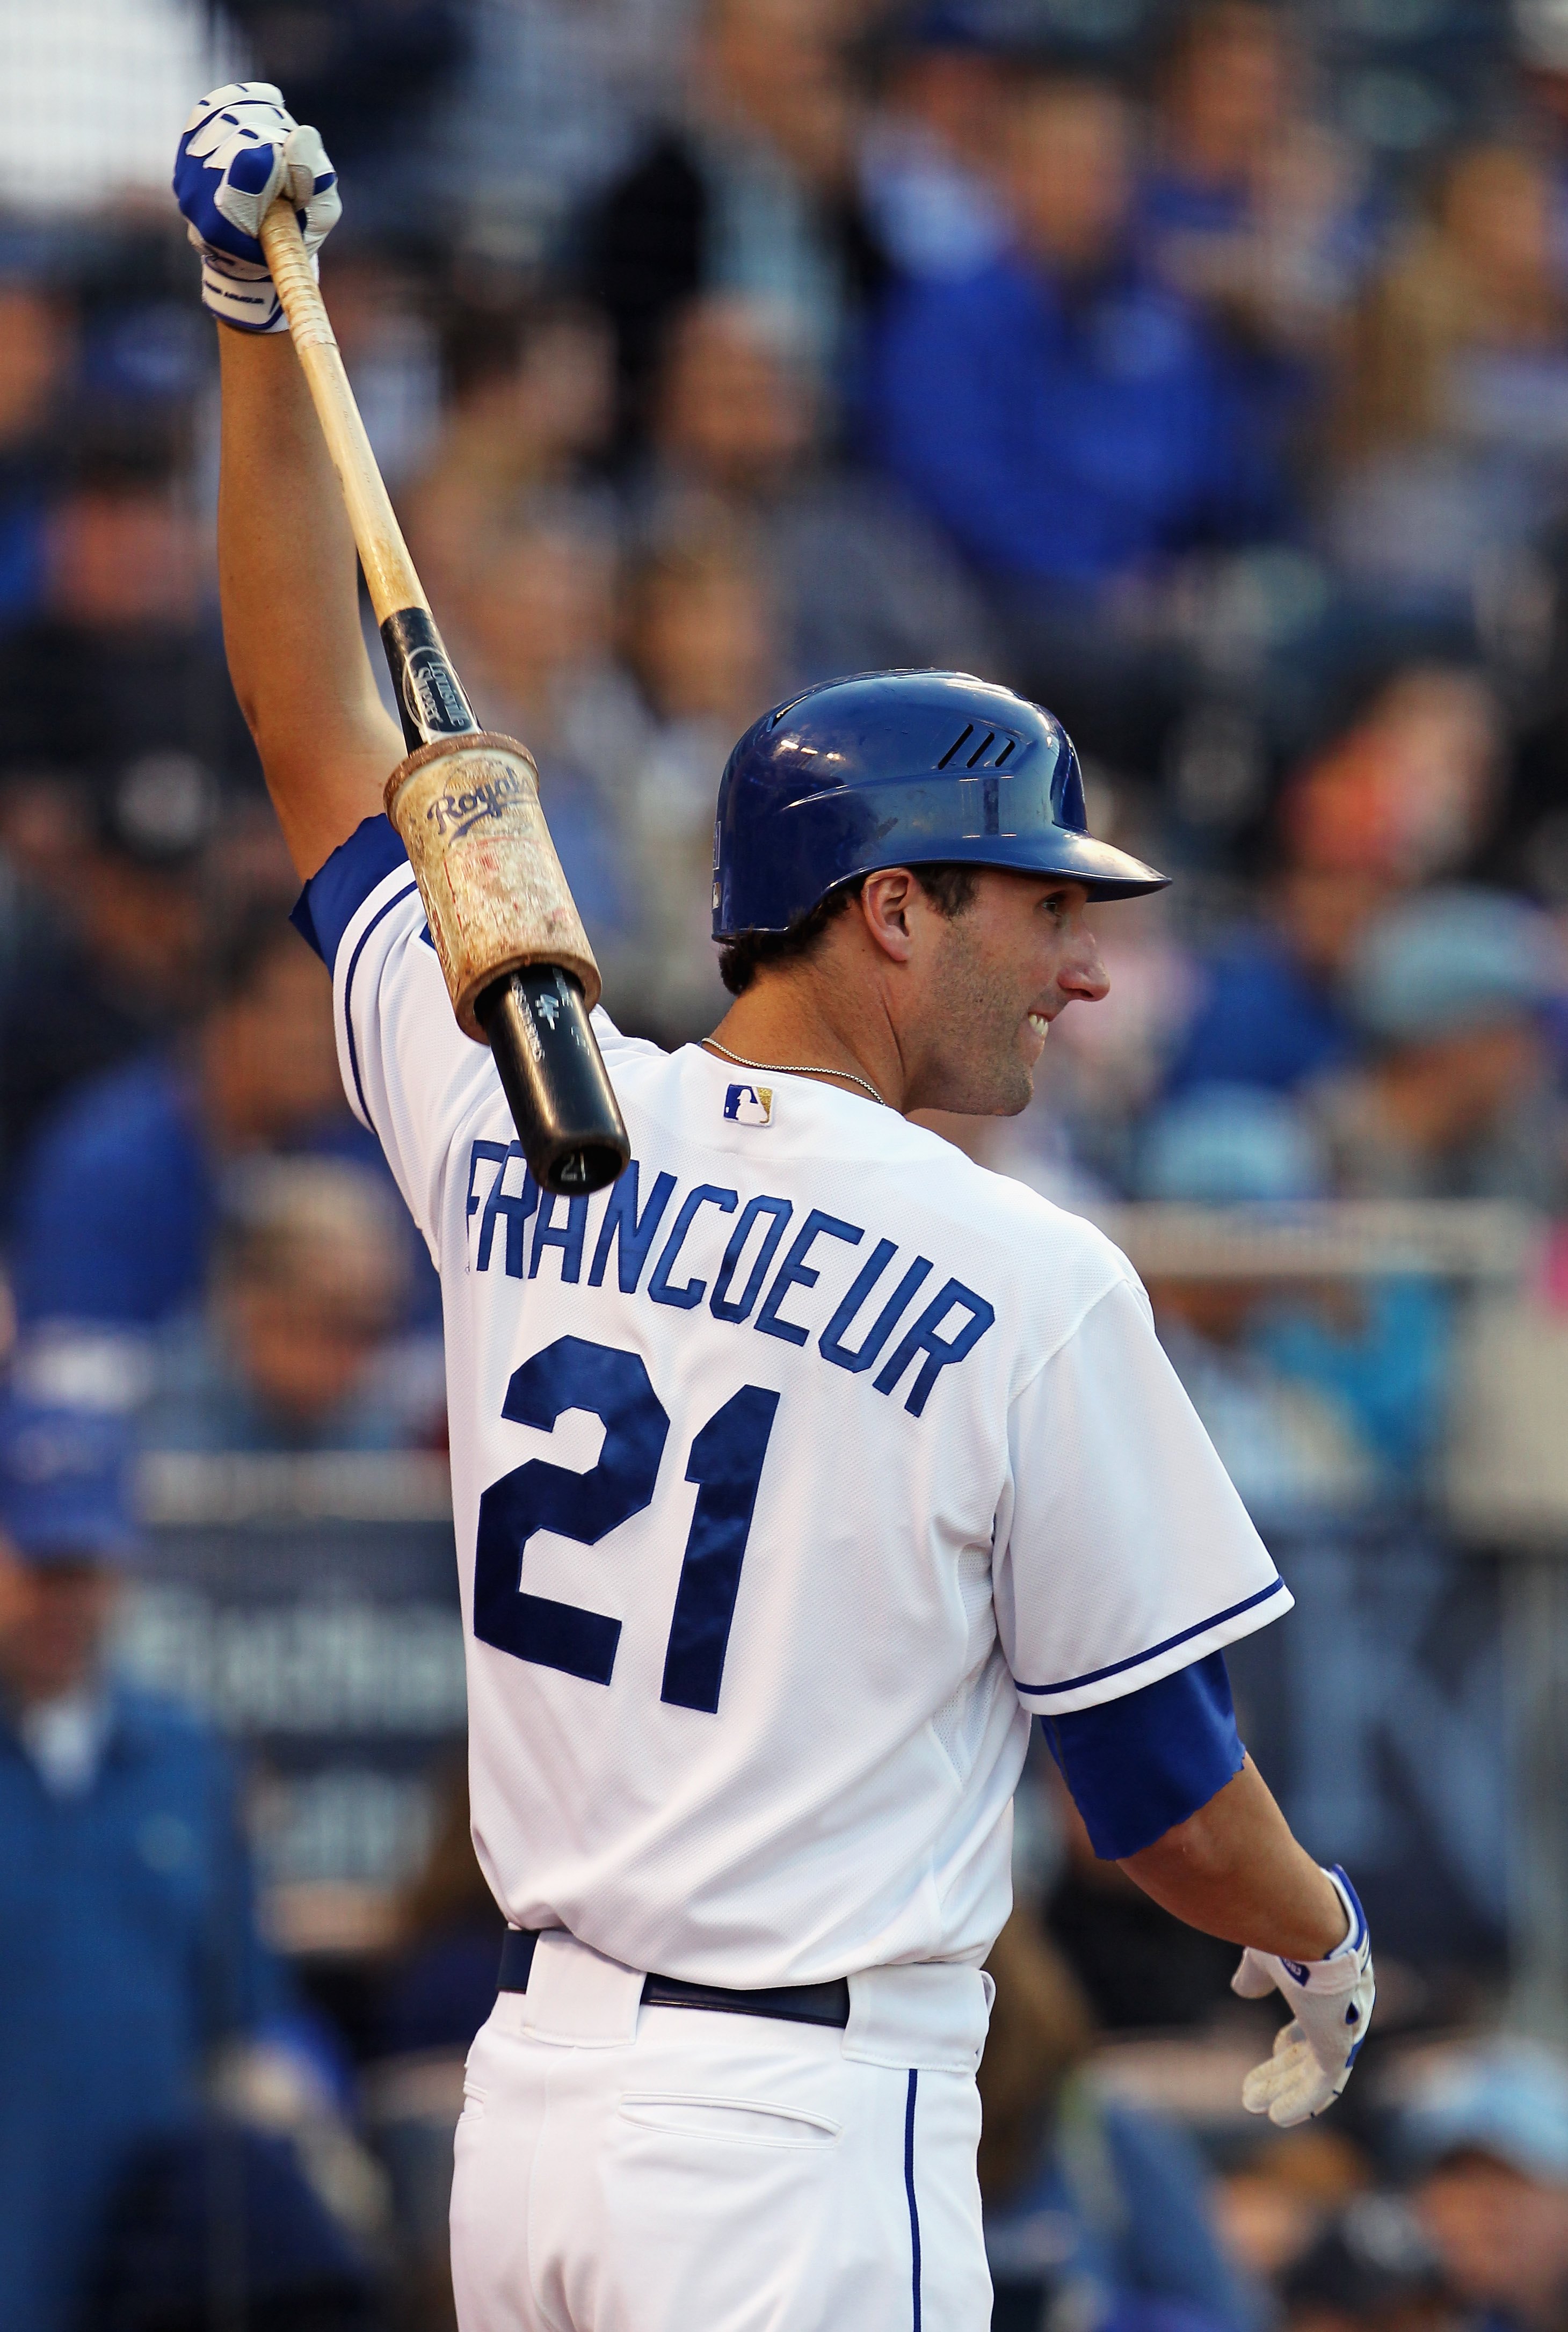 New York Mets outfielder Jeff Francoeur the lone offensive bright